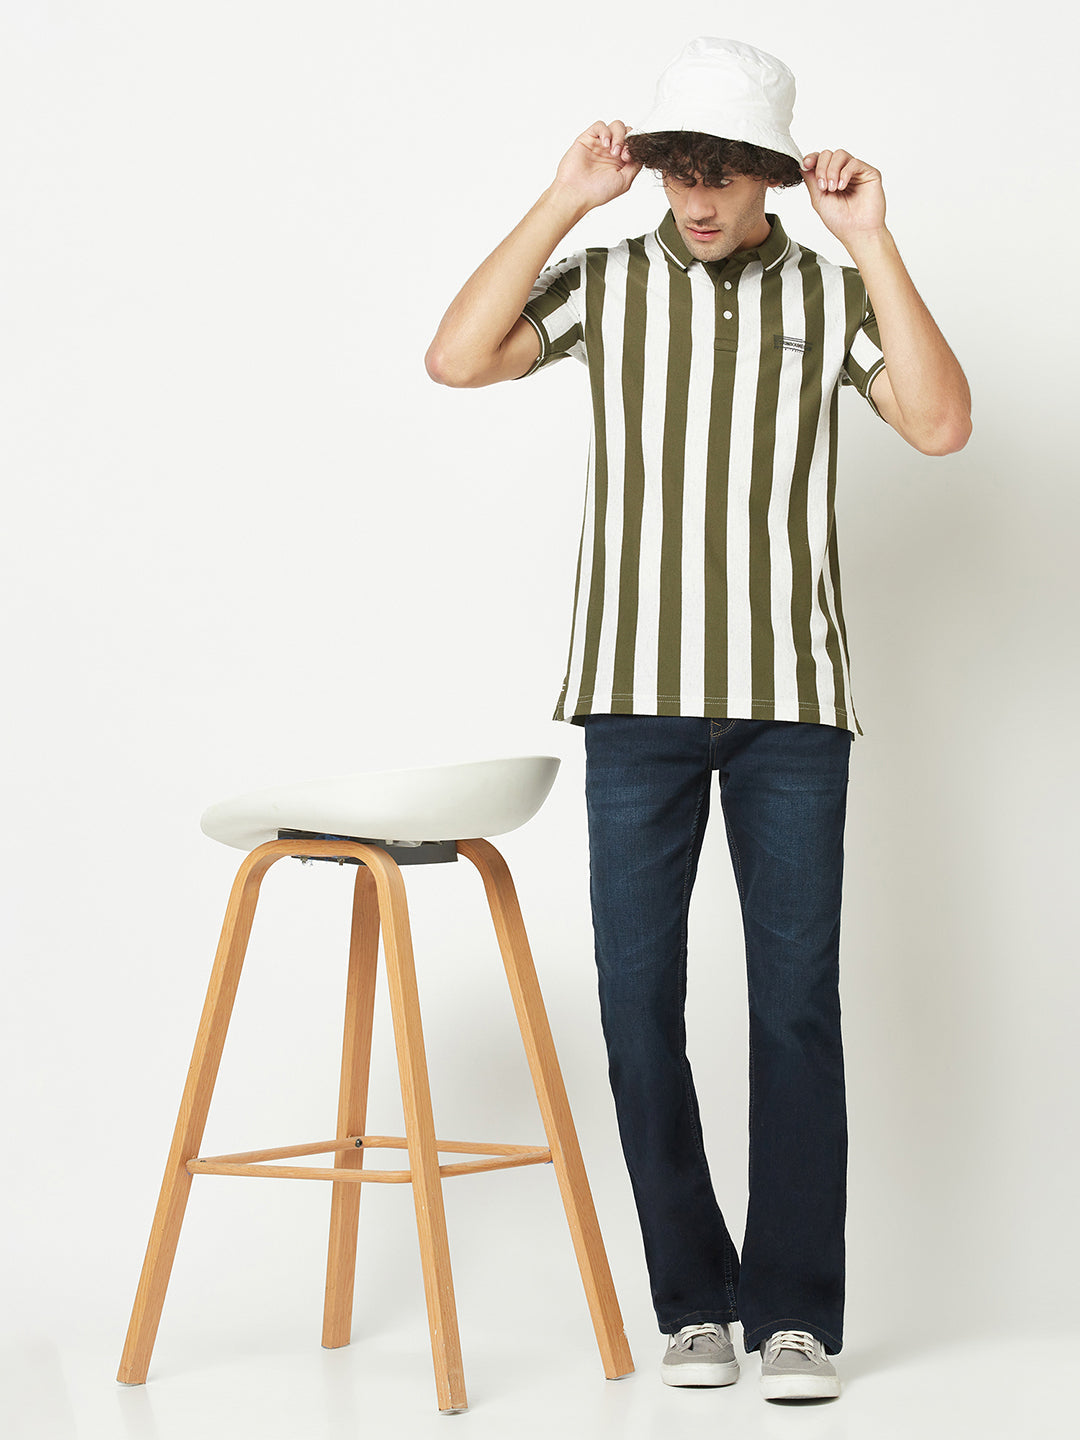  Olive Green Striped Polo T-Shirt